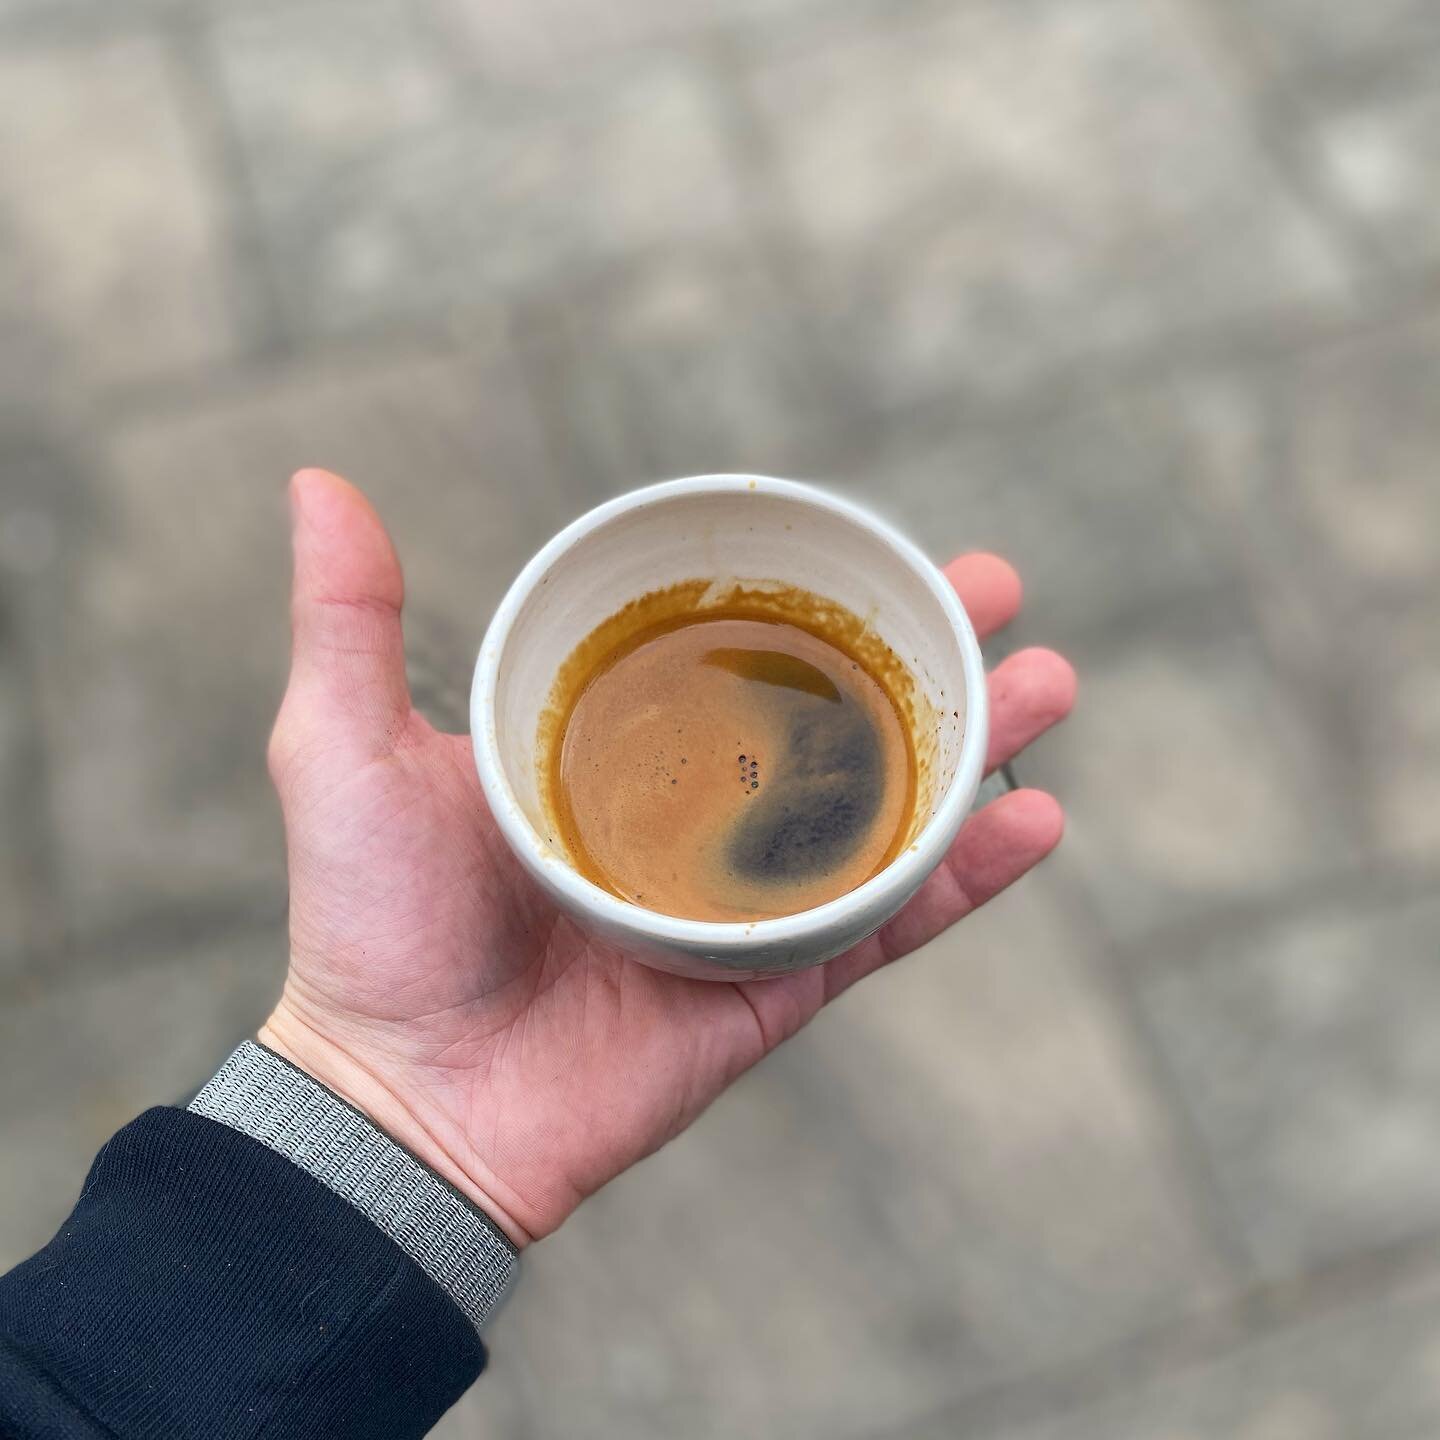 Afternoon pick me up 😍 Are you enjoying our latest coffee? ☕️